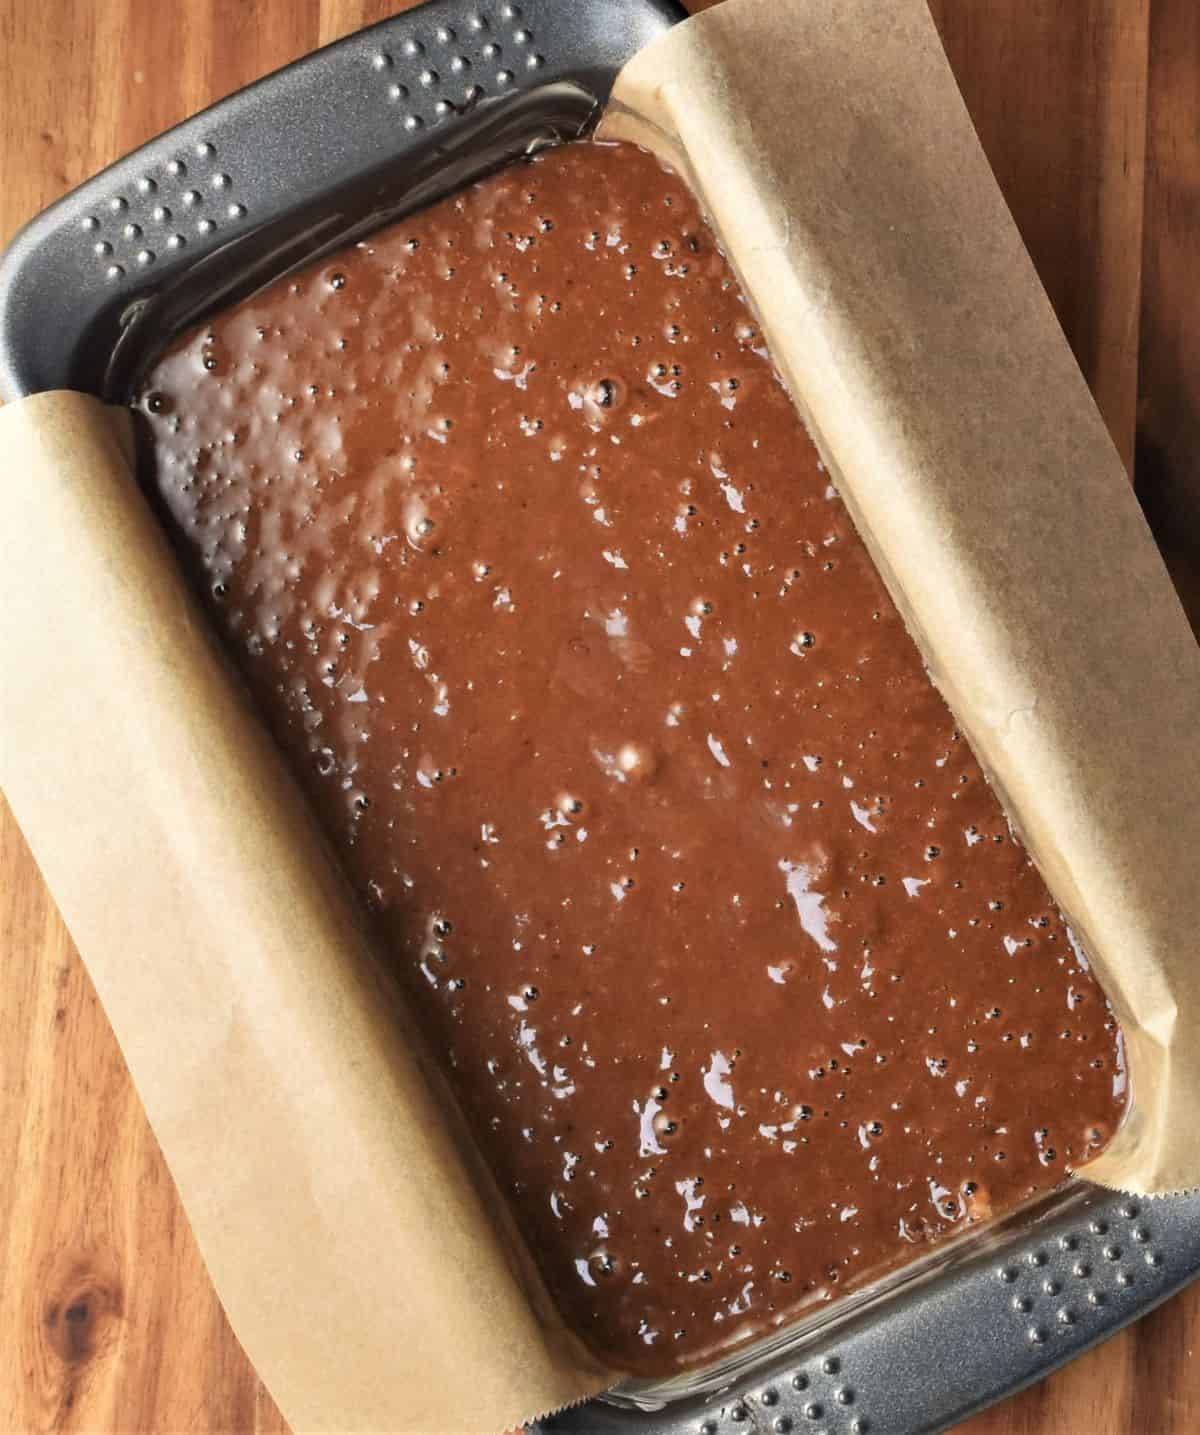 Gingerbread batter in loaf pan lined with parchment.